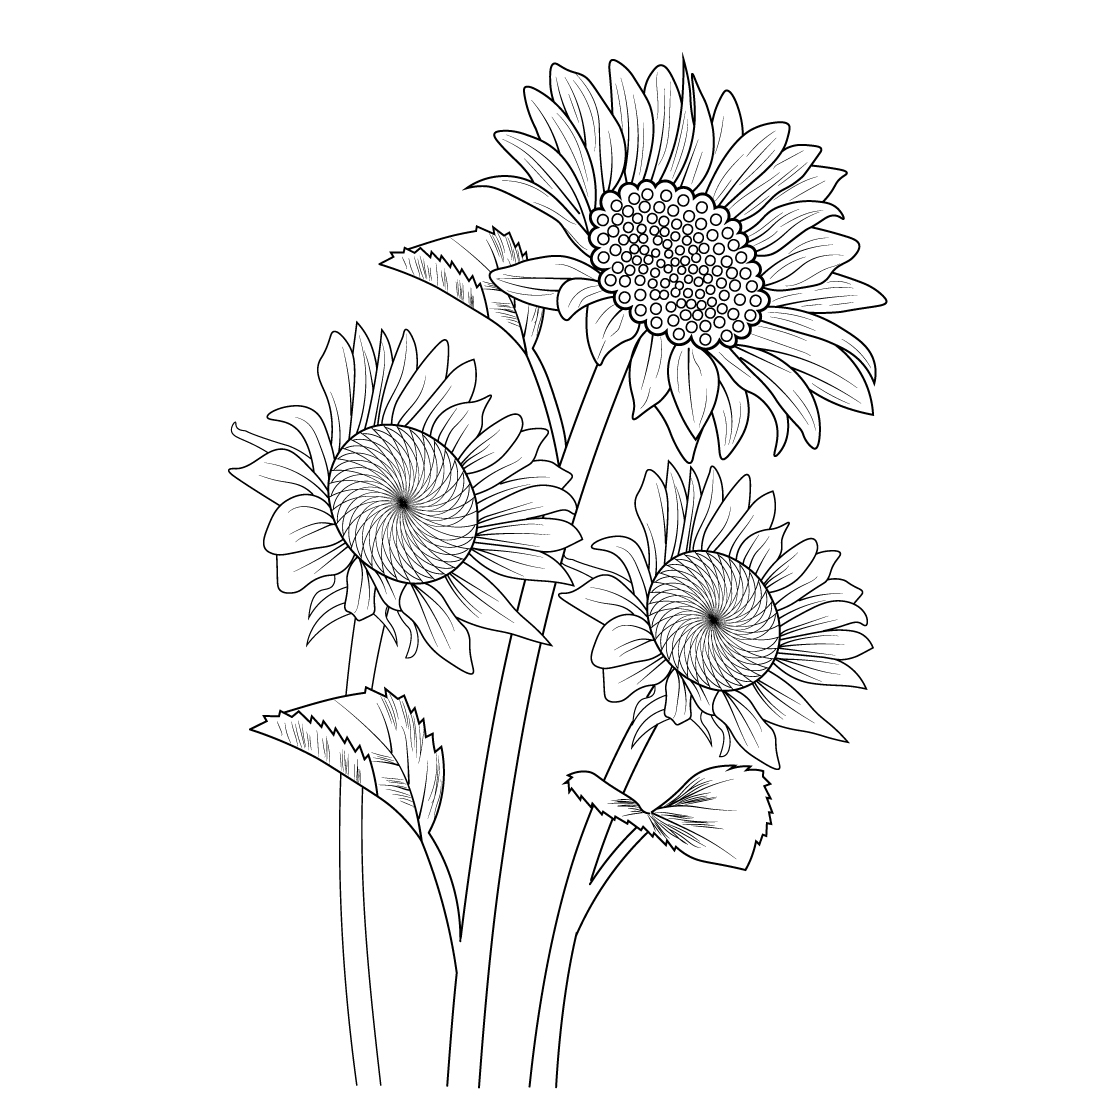 sunflower line art, floral vector illustration, vintage engraved style flowers with sunflowers isolated on white background, and hand-drawn botanical sunflowers botanical illustration sunflower botanical drawing, beautiful monochrome sunflower vector sketch blossom sunflower drawing branch vector illustration preview image.